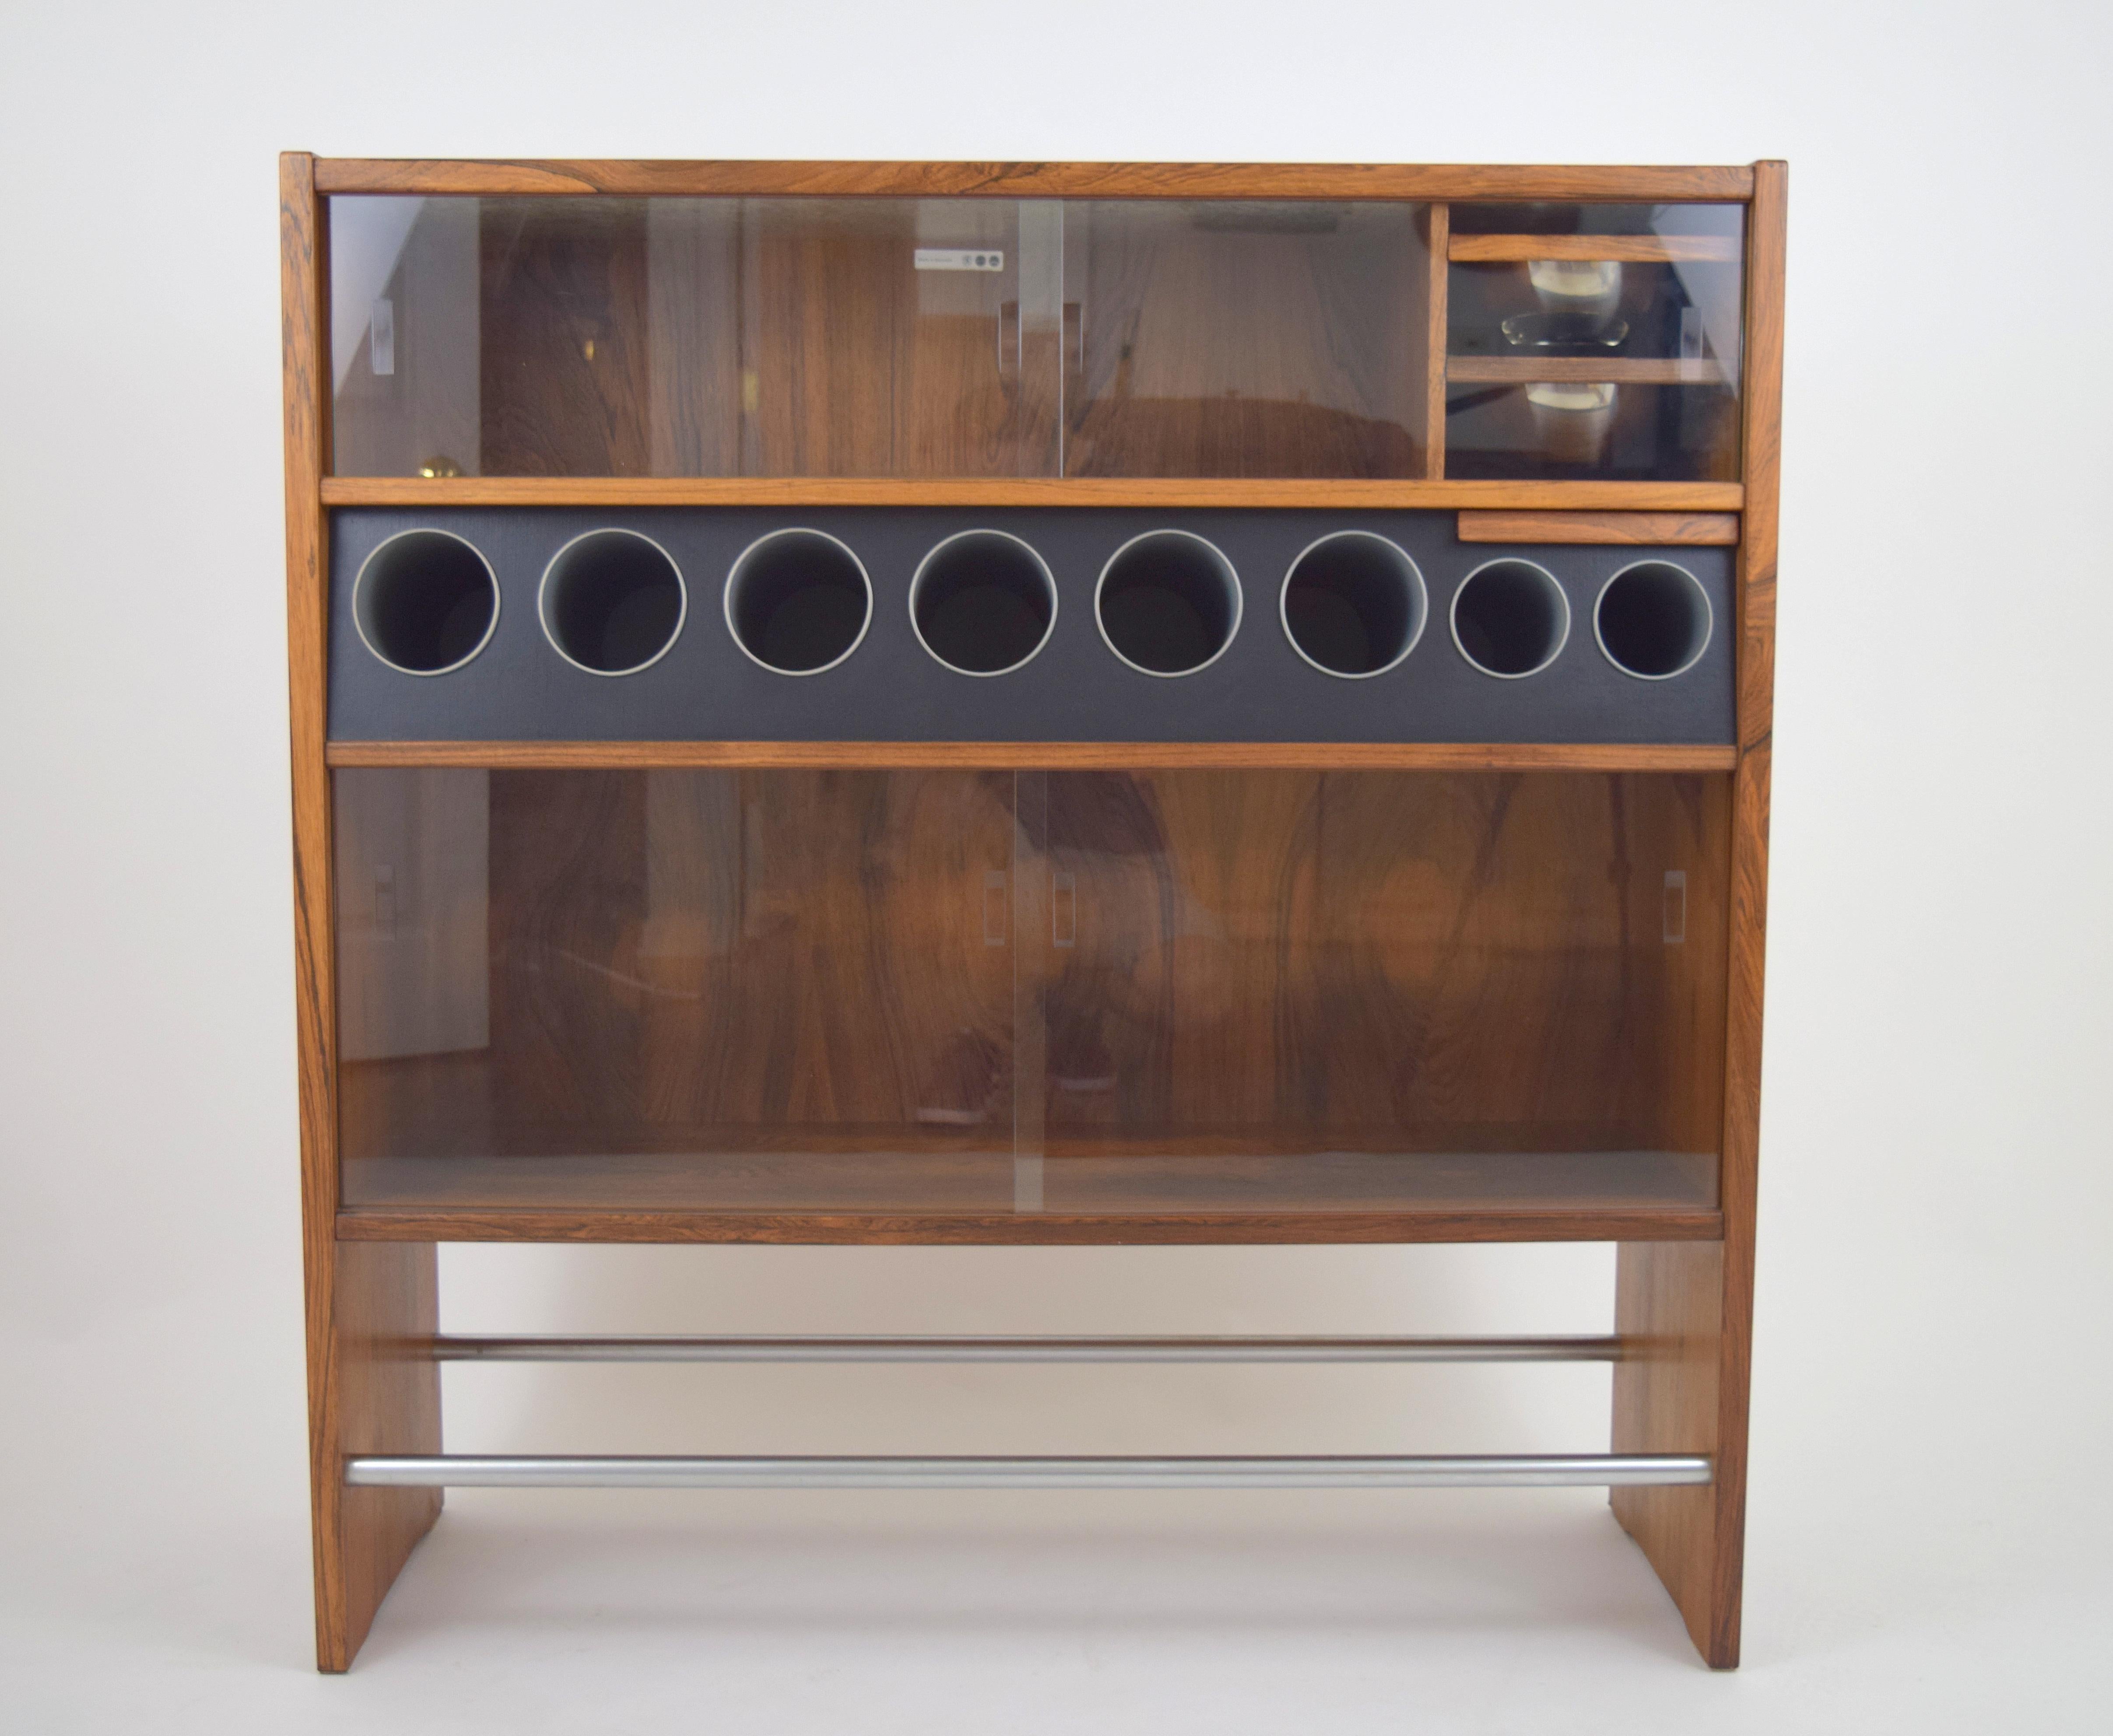 Highly functional rosewood dry bar by Erik Buch. Beautifully grained rosewood case with varying sized bottle storage tubes, two pull-out removable stainless steel bowls, pull-out tray, Two stainless steel foot rest bars, and two open storage areas